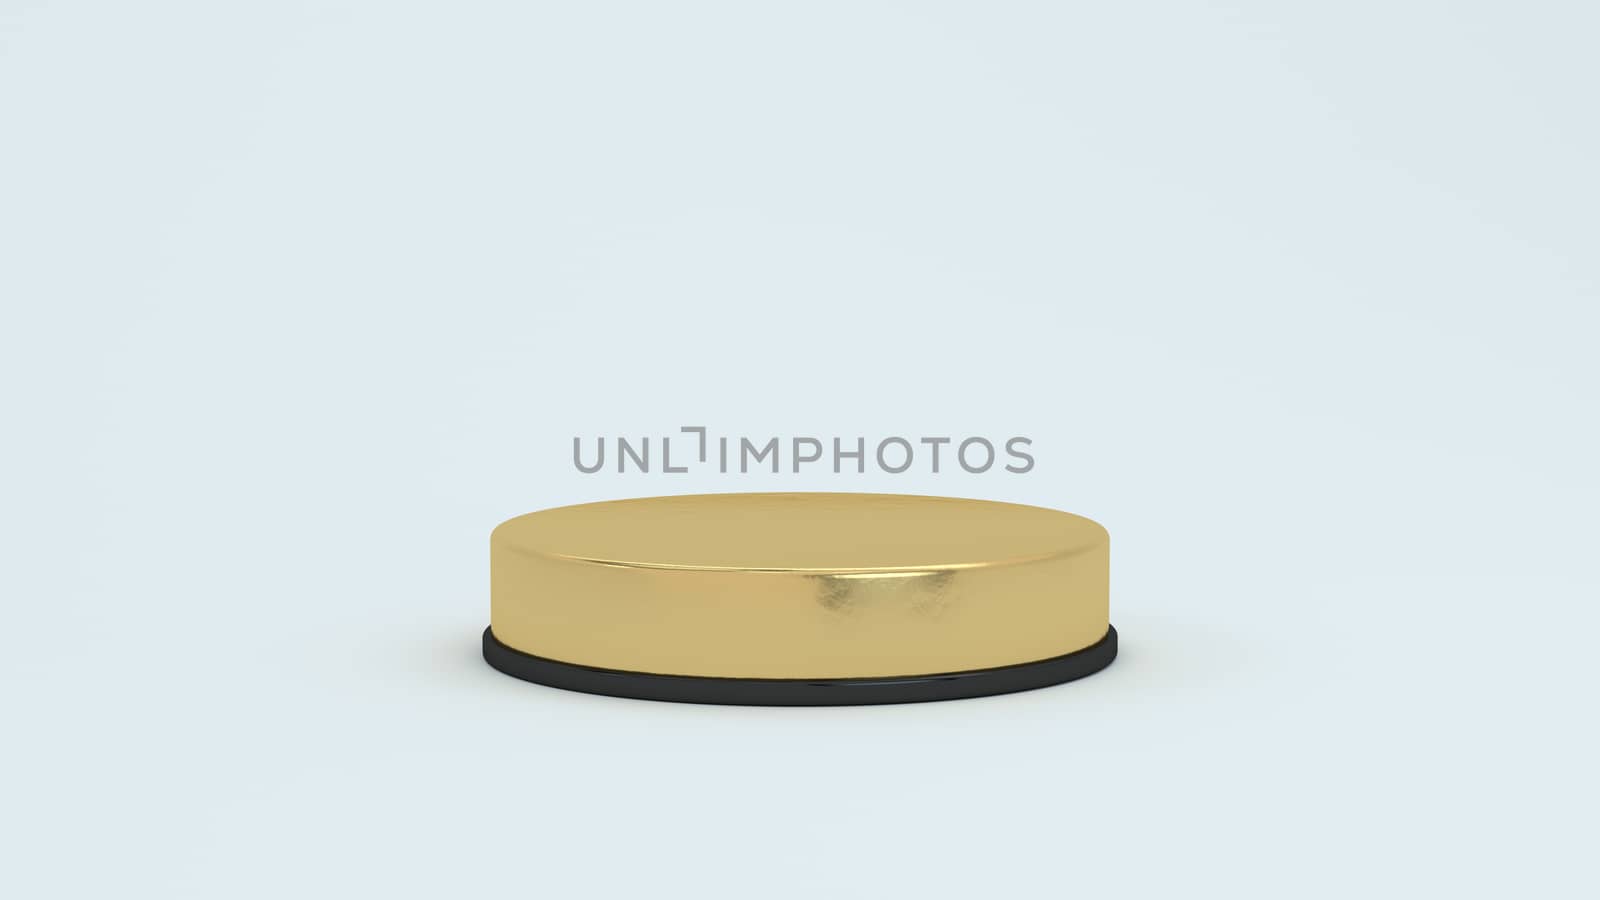 3d render abstract platforms with golden part. Realistic mock up for promotion, banners background, product show. Illustration